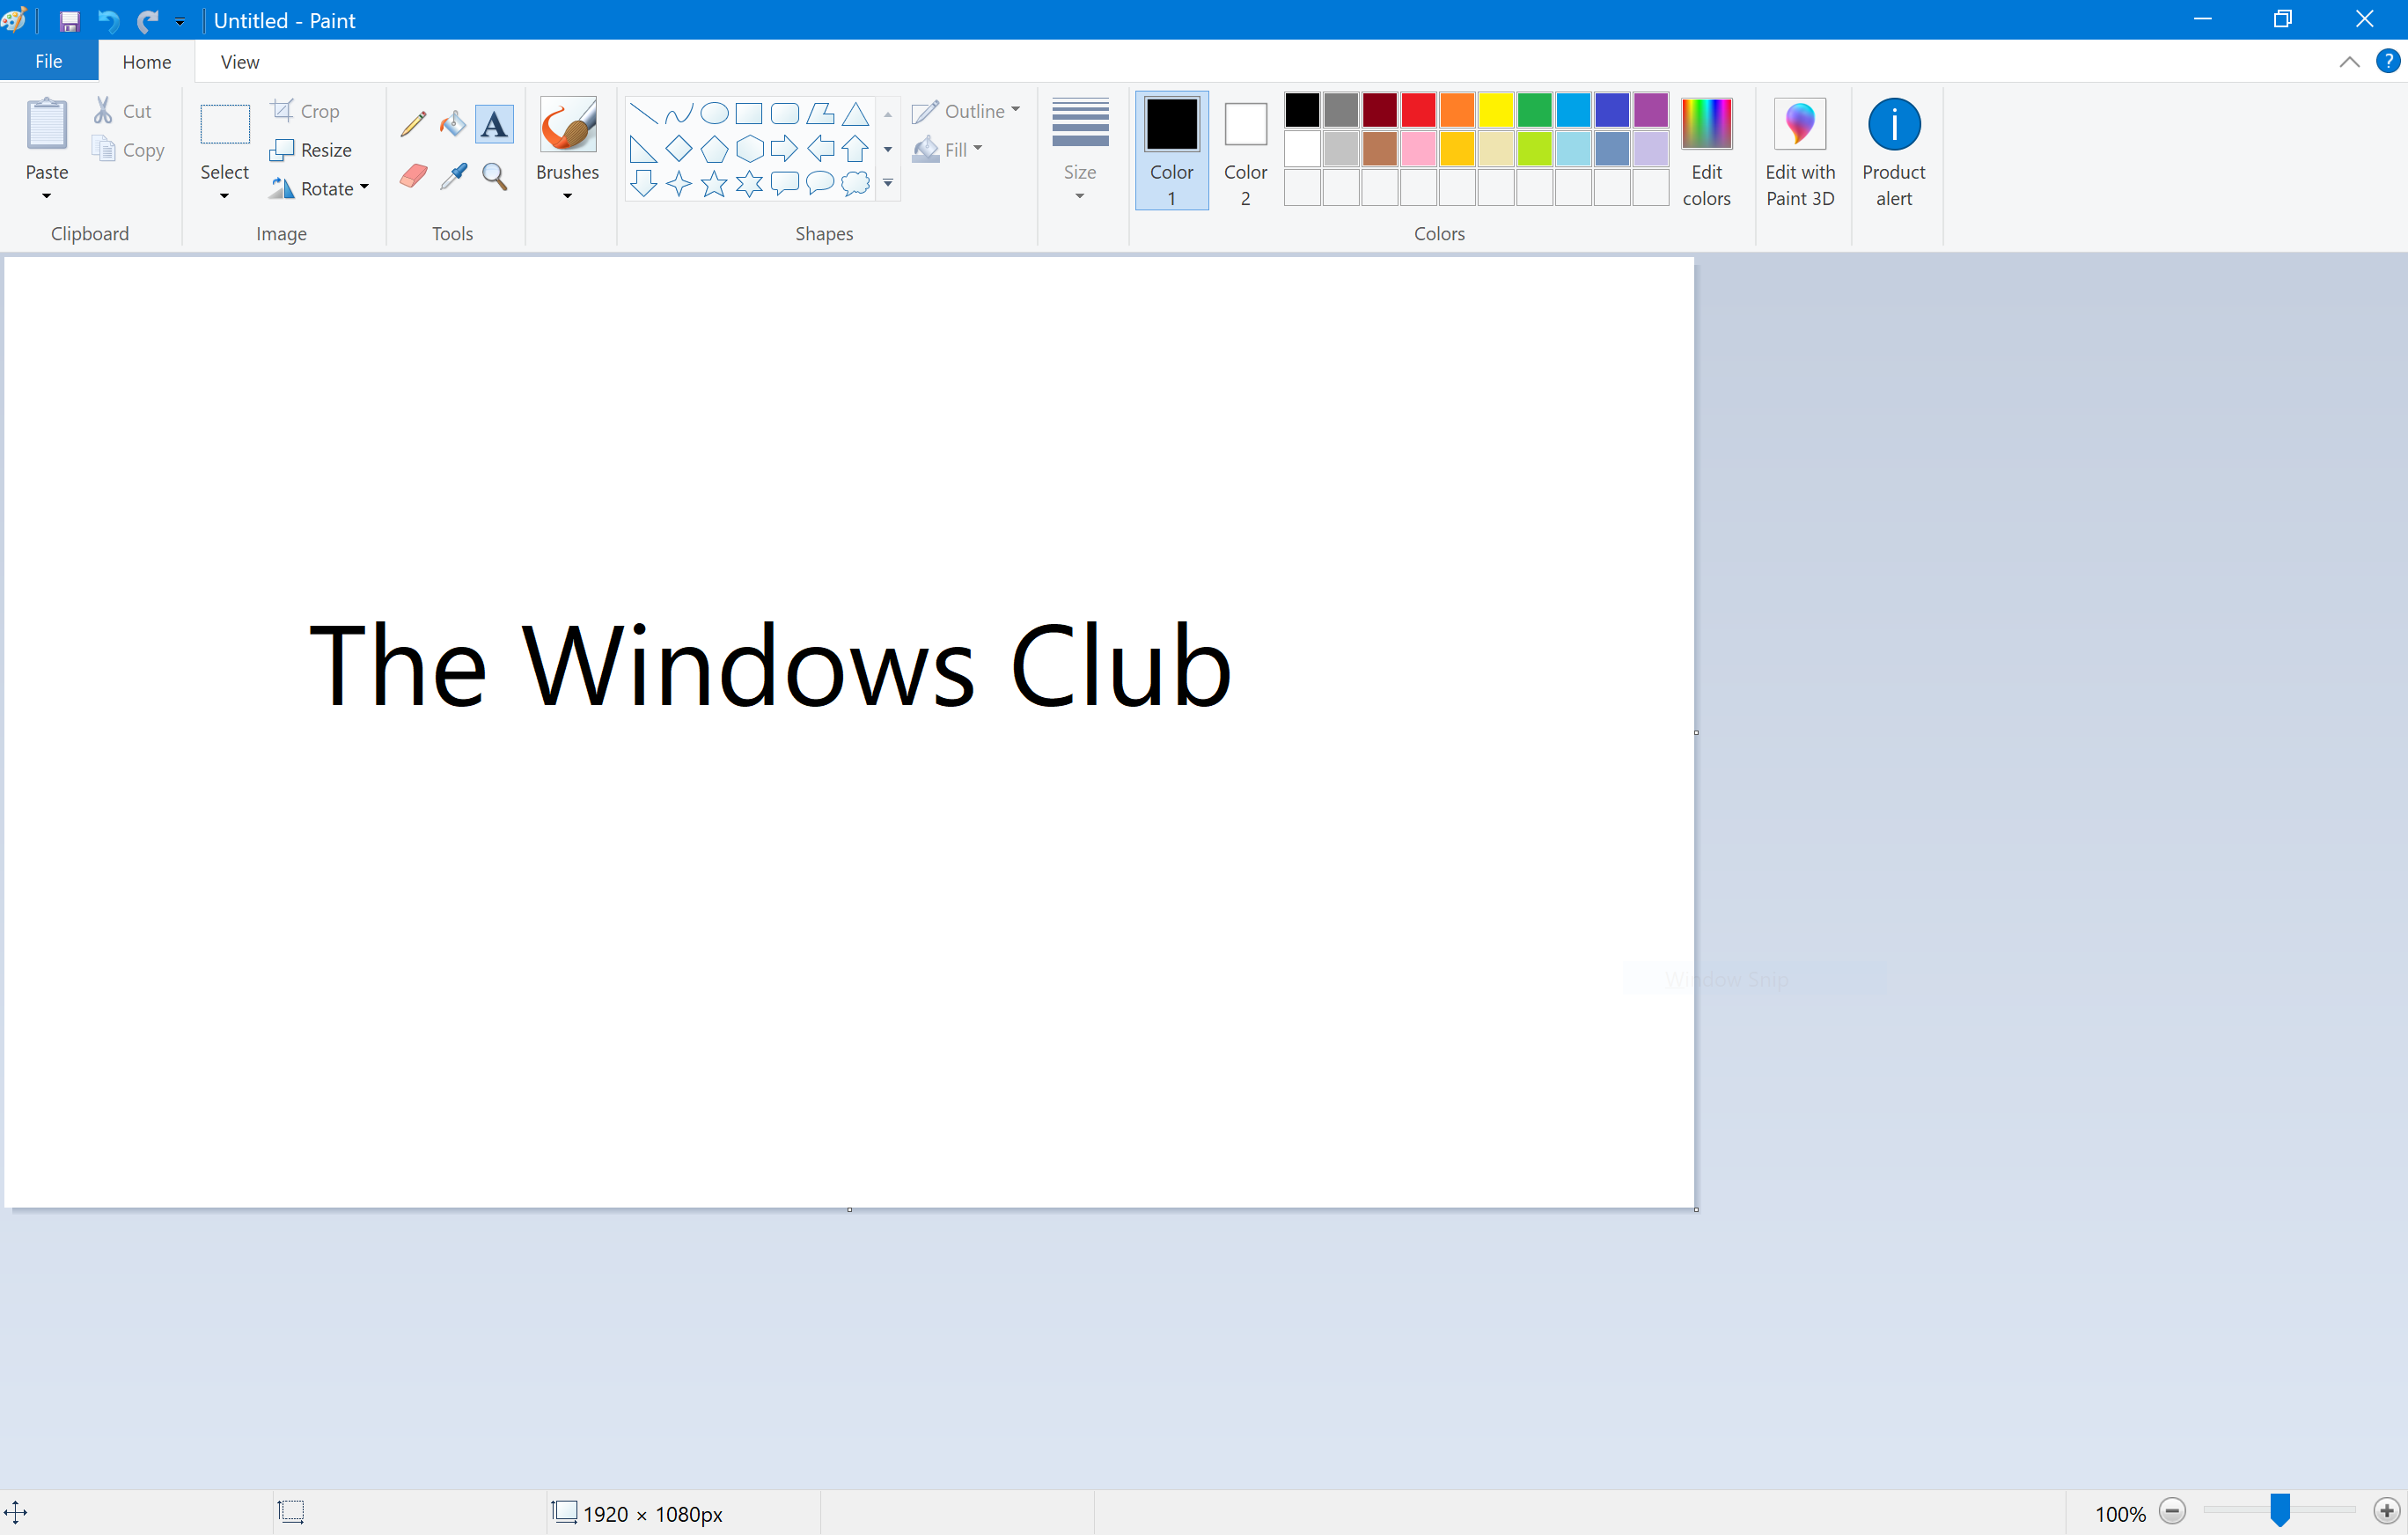 Microsoft Paint is getting an update with Windows 10 v1903